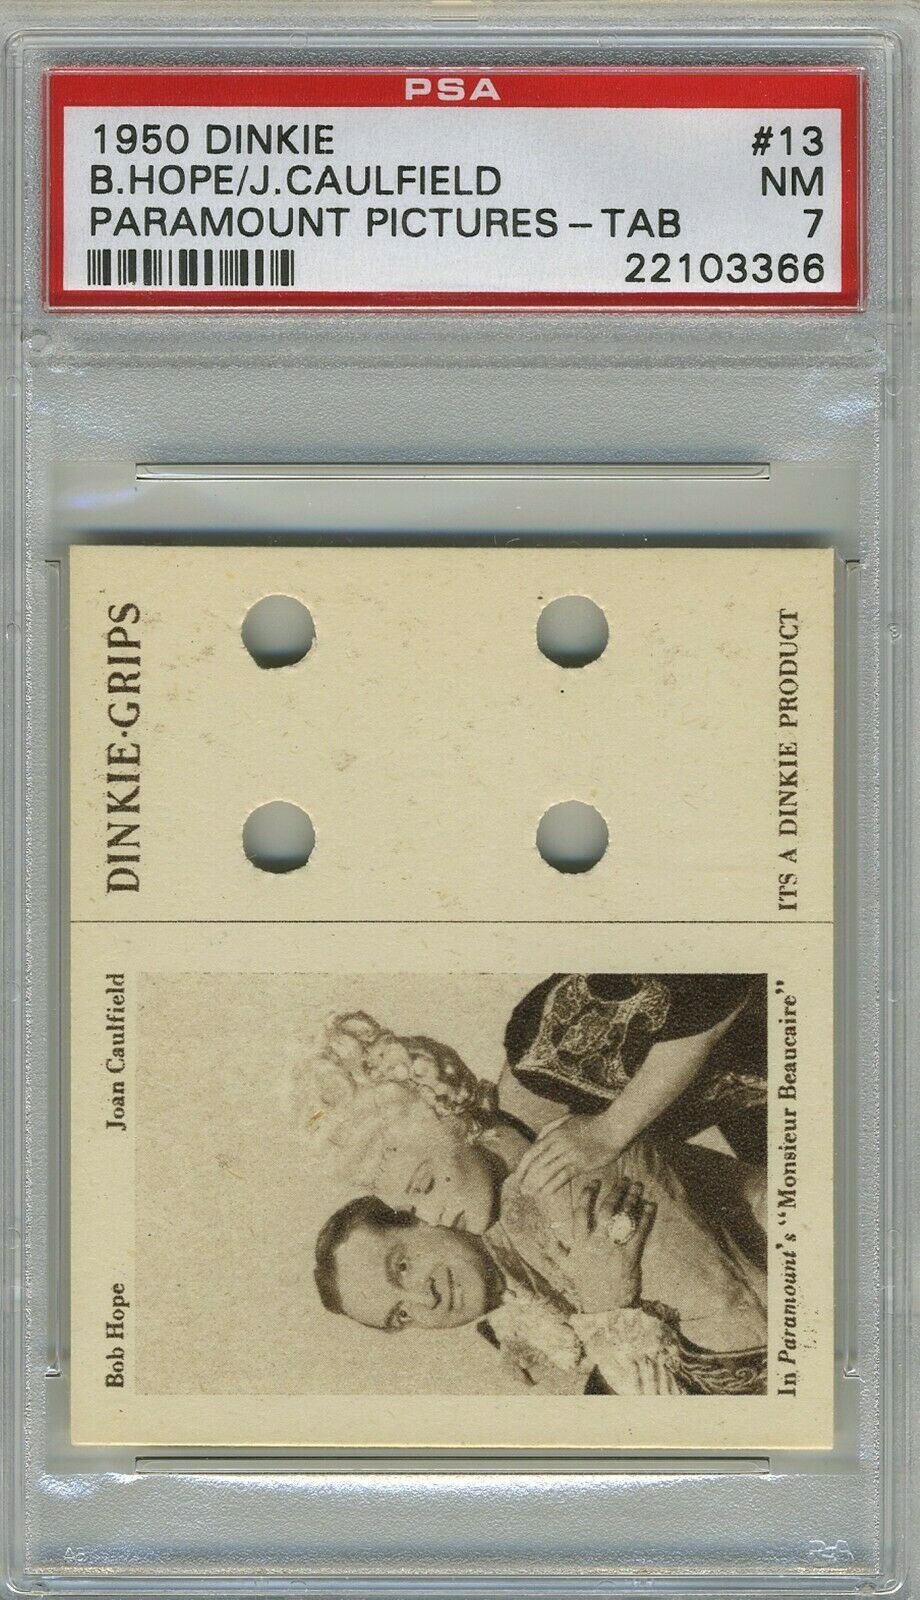 1950 Dinkie Grips Paramount Pictures - W/tab #13 Hope / Caulfield - Psa 7 Nm